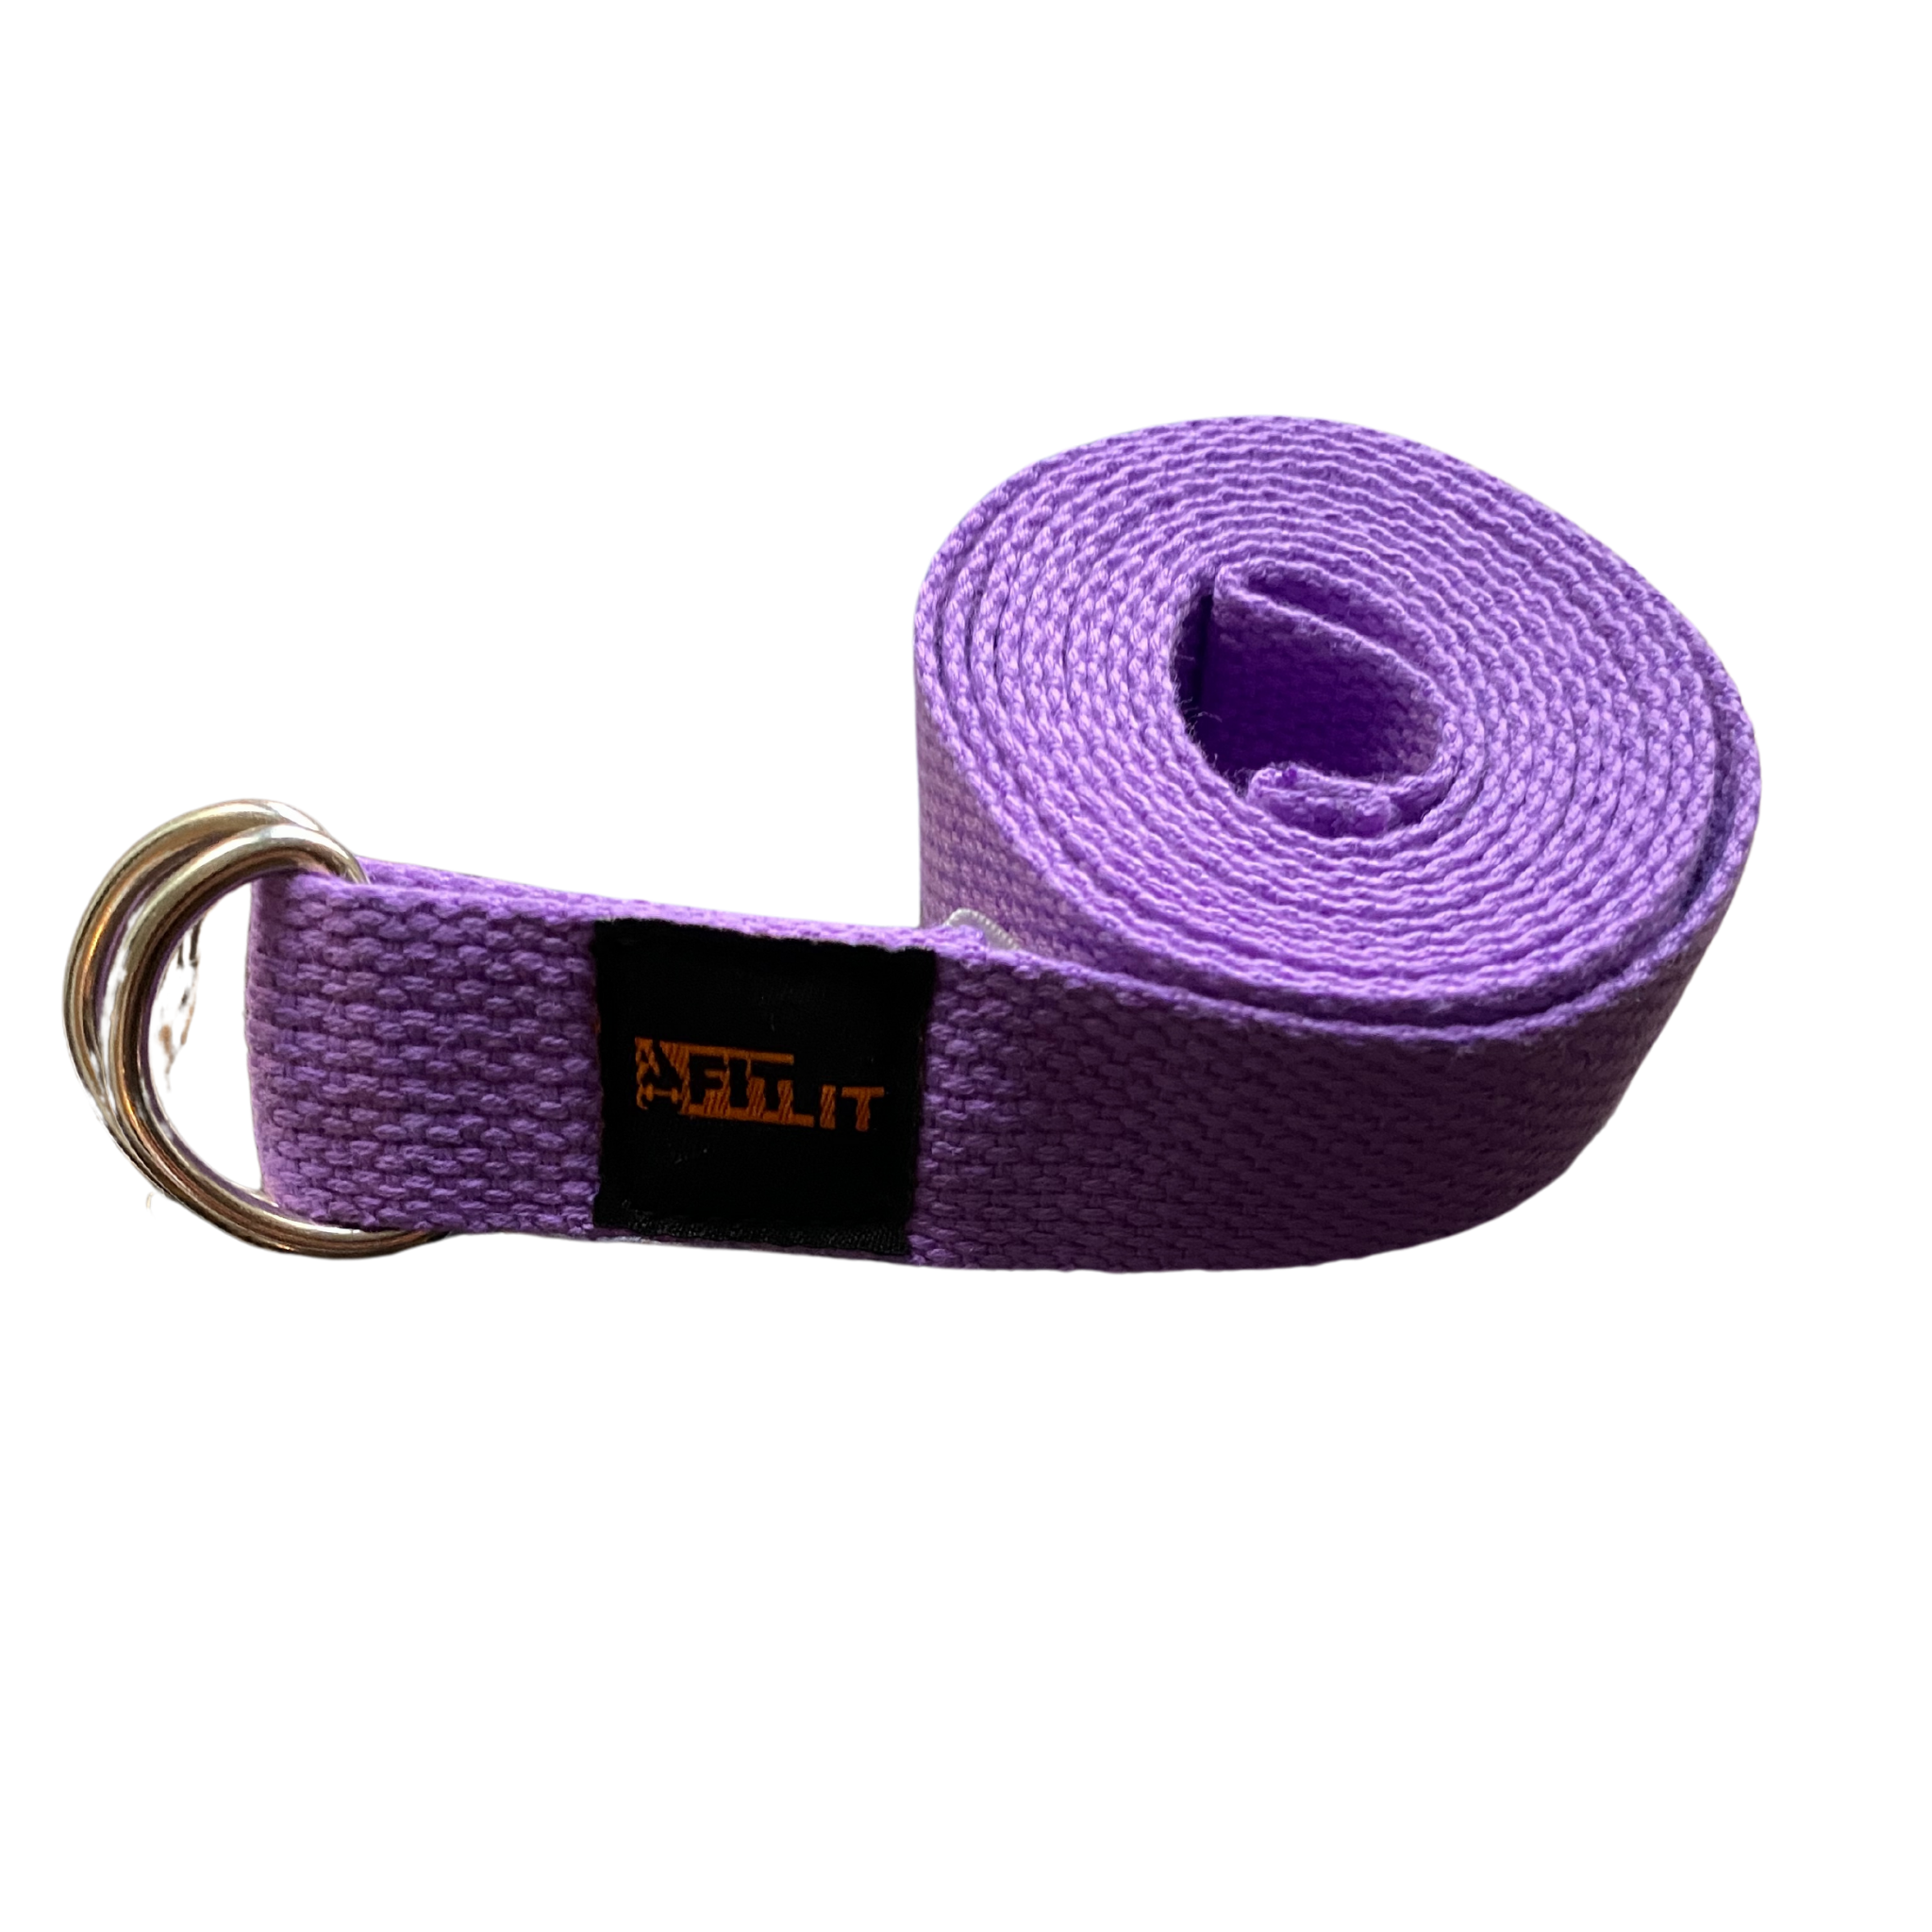 DreamPalace Yoga Stretch Belt / Strap Best for Daily Stretching, Yoga,  Physical Therapy Cotton Yoga Strap Price in India - Buy DreamPalace Yoga  Stretch Belt / Strap Best for Daily Stretching, Yoga